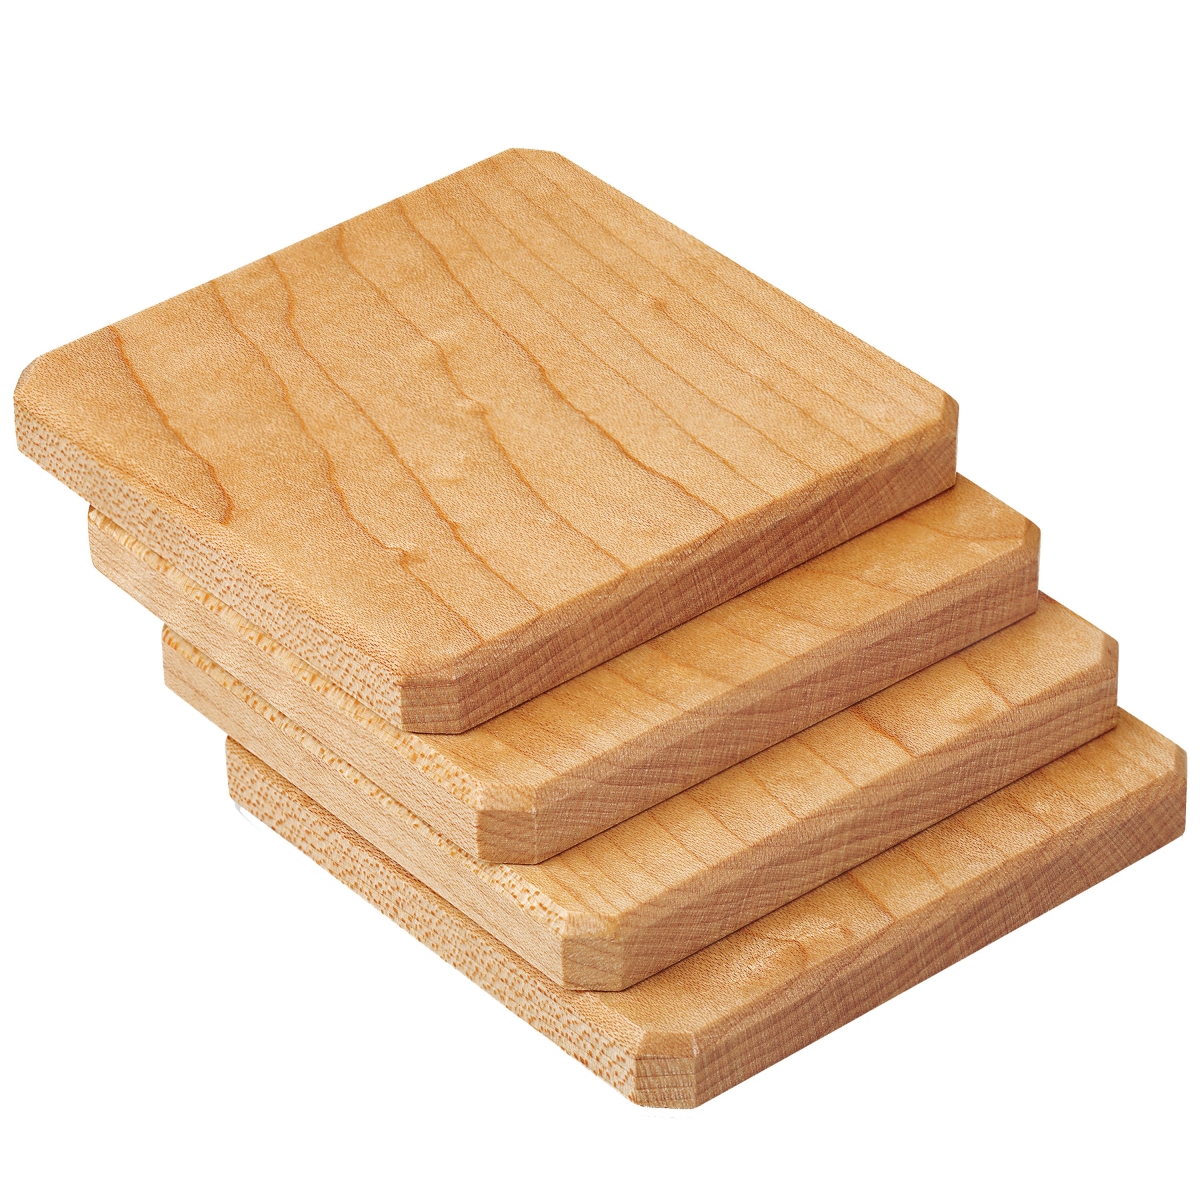 Picture of A & E Millwork AEM-5005 Maple Wood Coasters Edge Grain - Set of 4